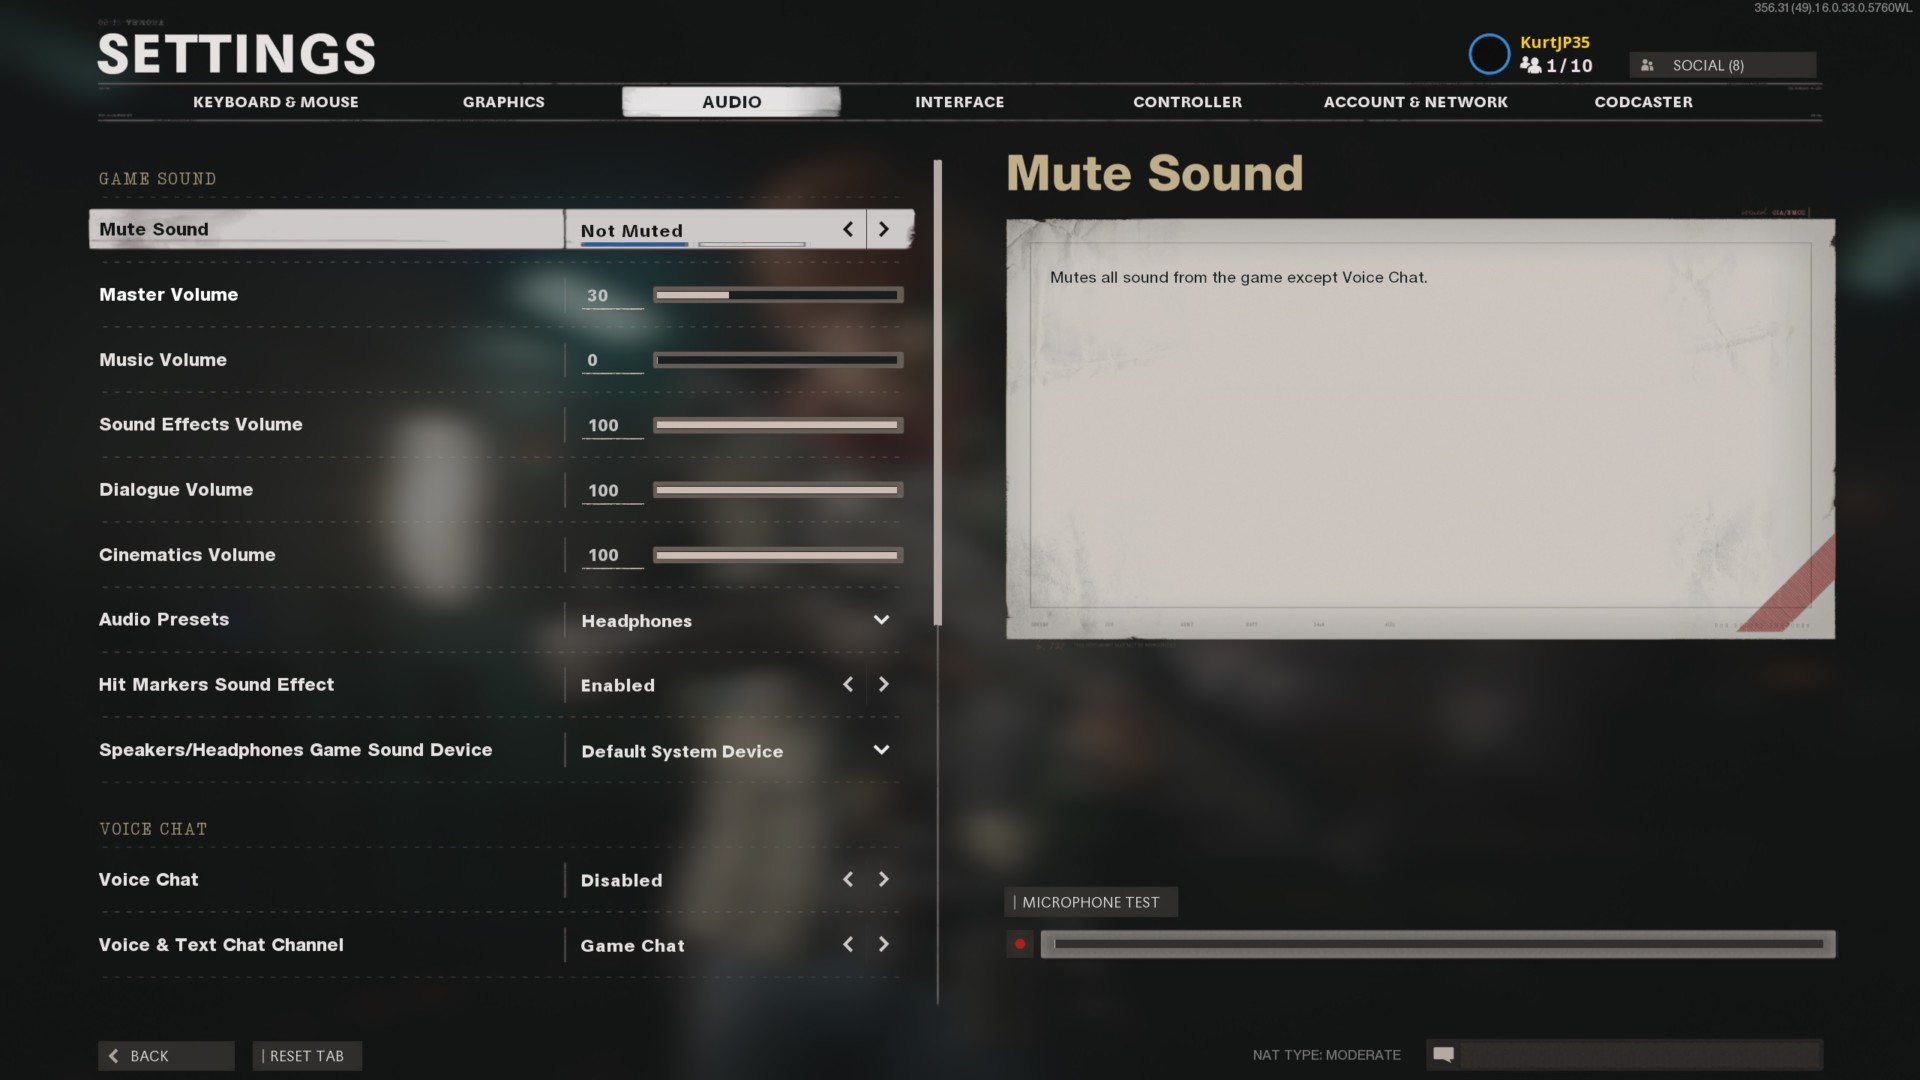 Call of Duty: Cold War, How To Change Language Settings